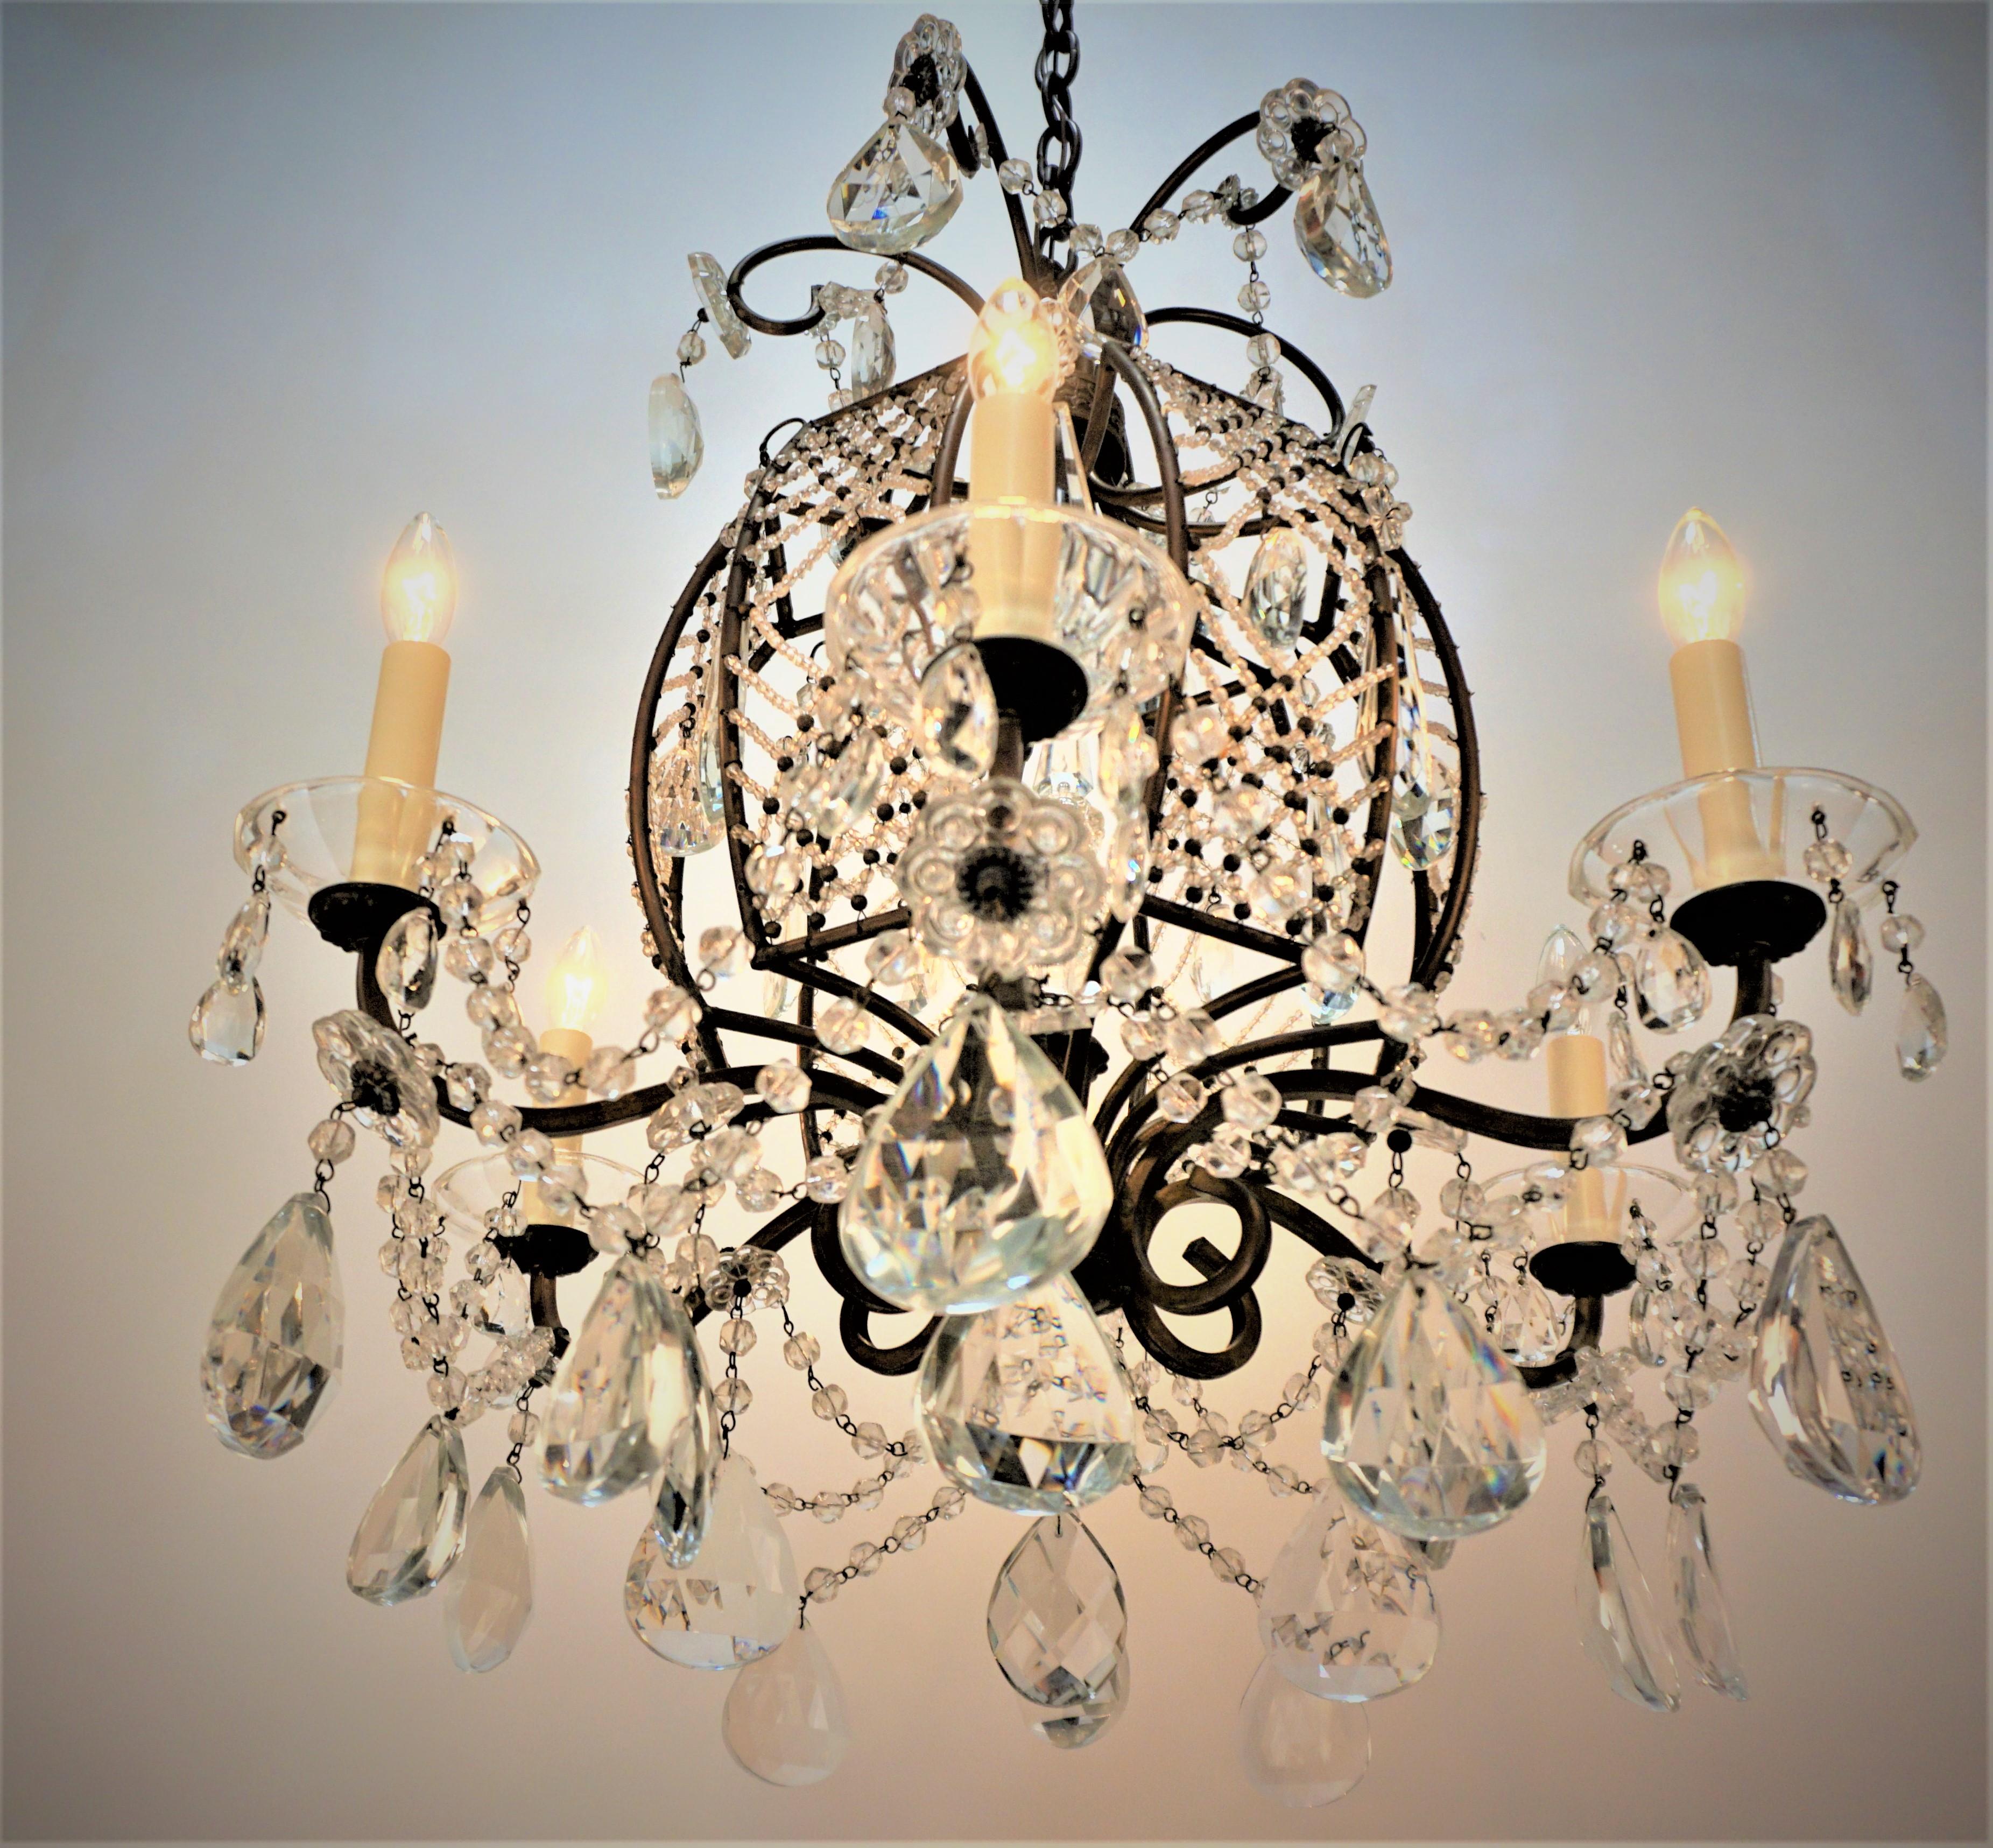 Beautiful 1930's crystal lace work, cut crystal with bronze frame 1930's chandelier.
Measurement: 22